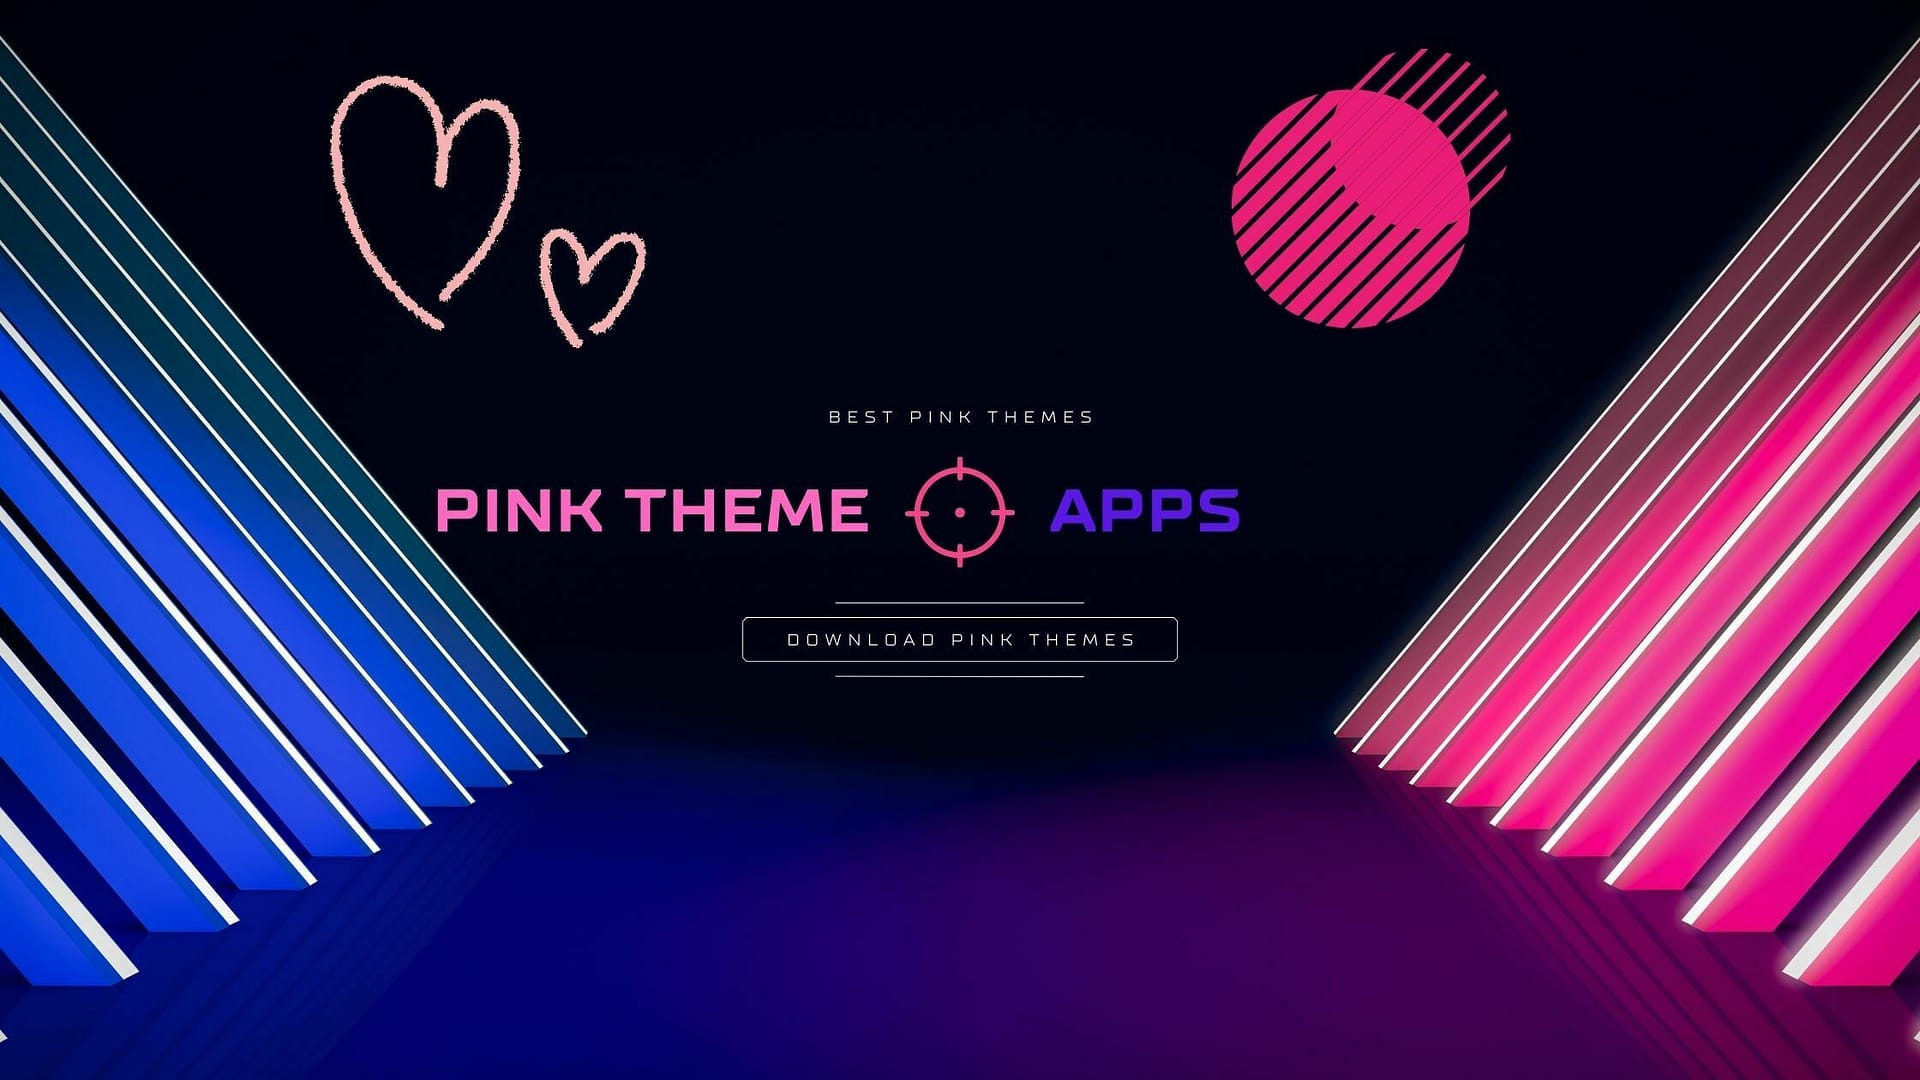 Pink Theme Apps